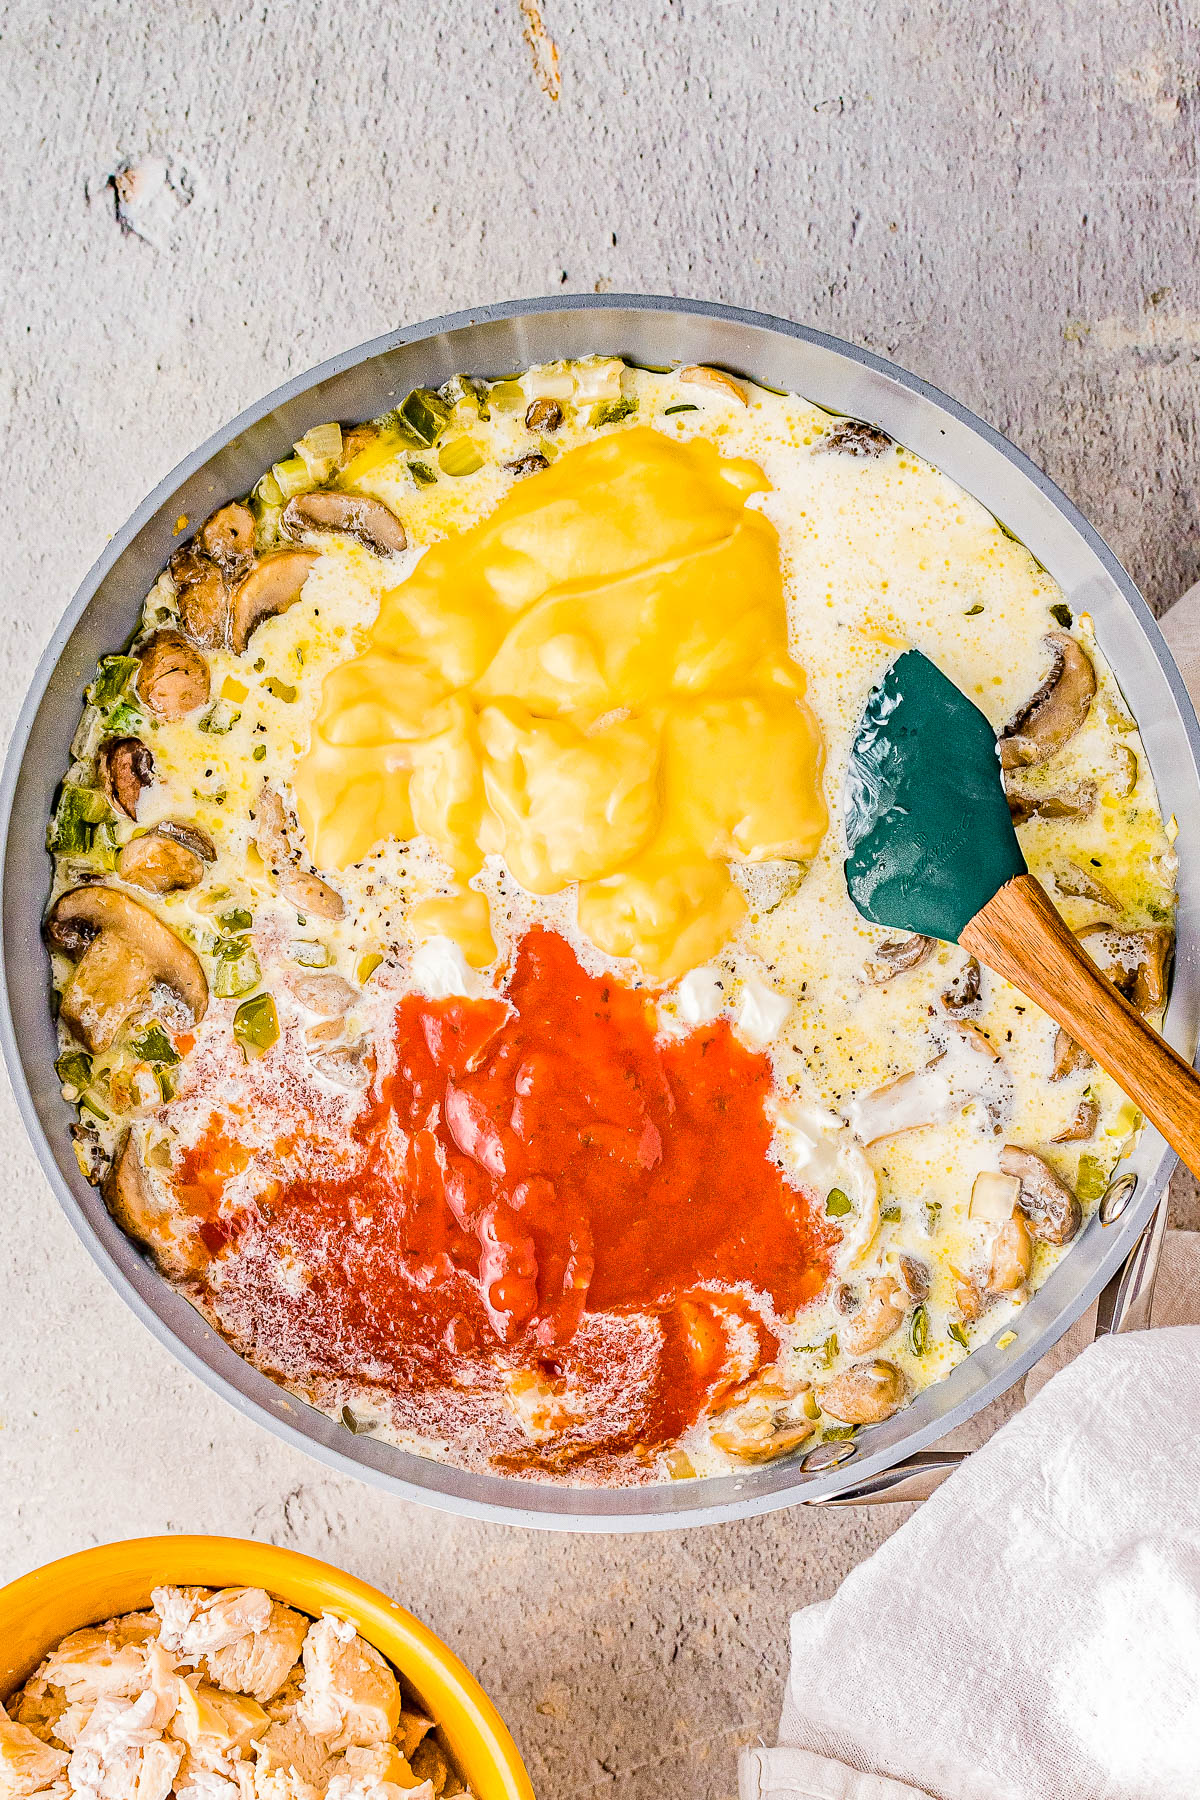 Turkey Tetrazzini - Wondering what to do with your leftover Thanksgiving turkey? This rich casserole features al dente spaghetti, a decadent cream sauce, tender vegetables, cheese, and of course your extra turkey! It's EASY to make and may be even better than your Thanksgiving feast! You can also sub leftover chicken or rotisserie chicken!